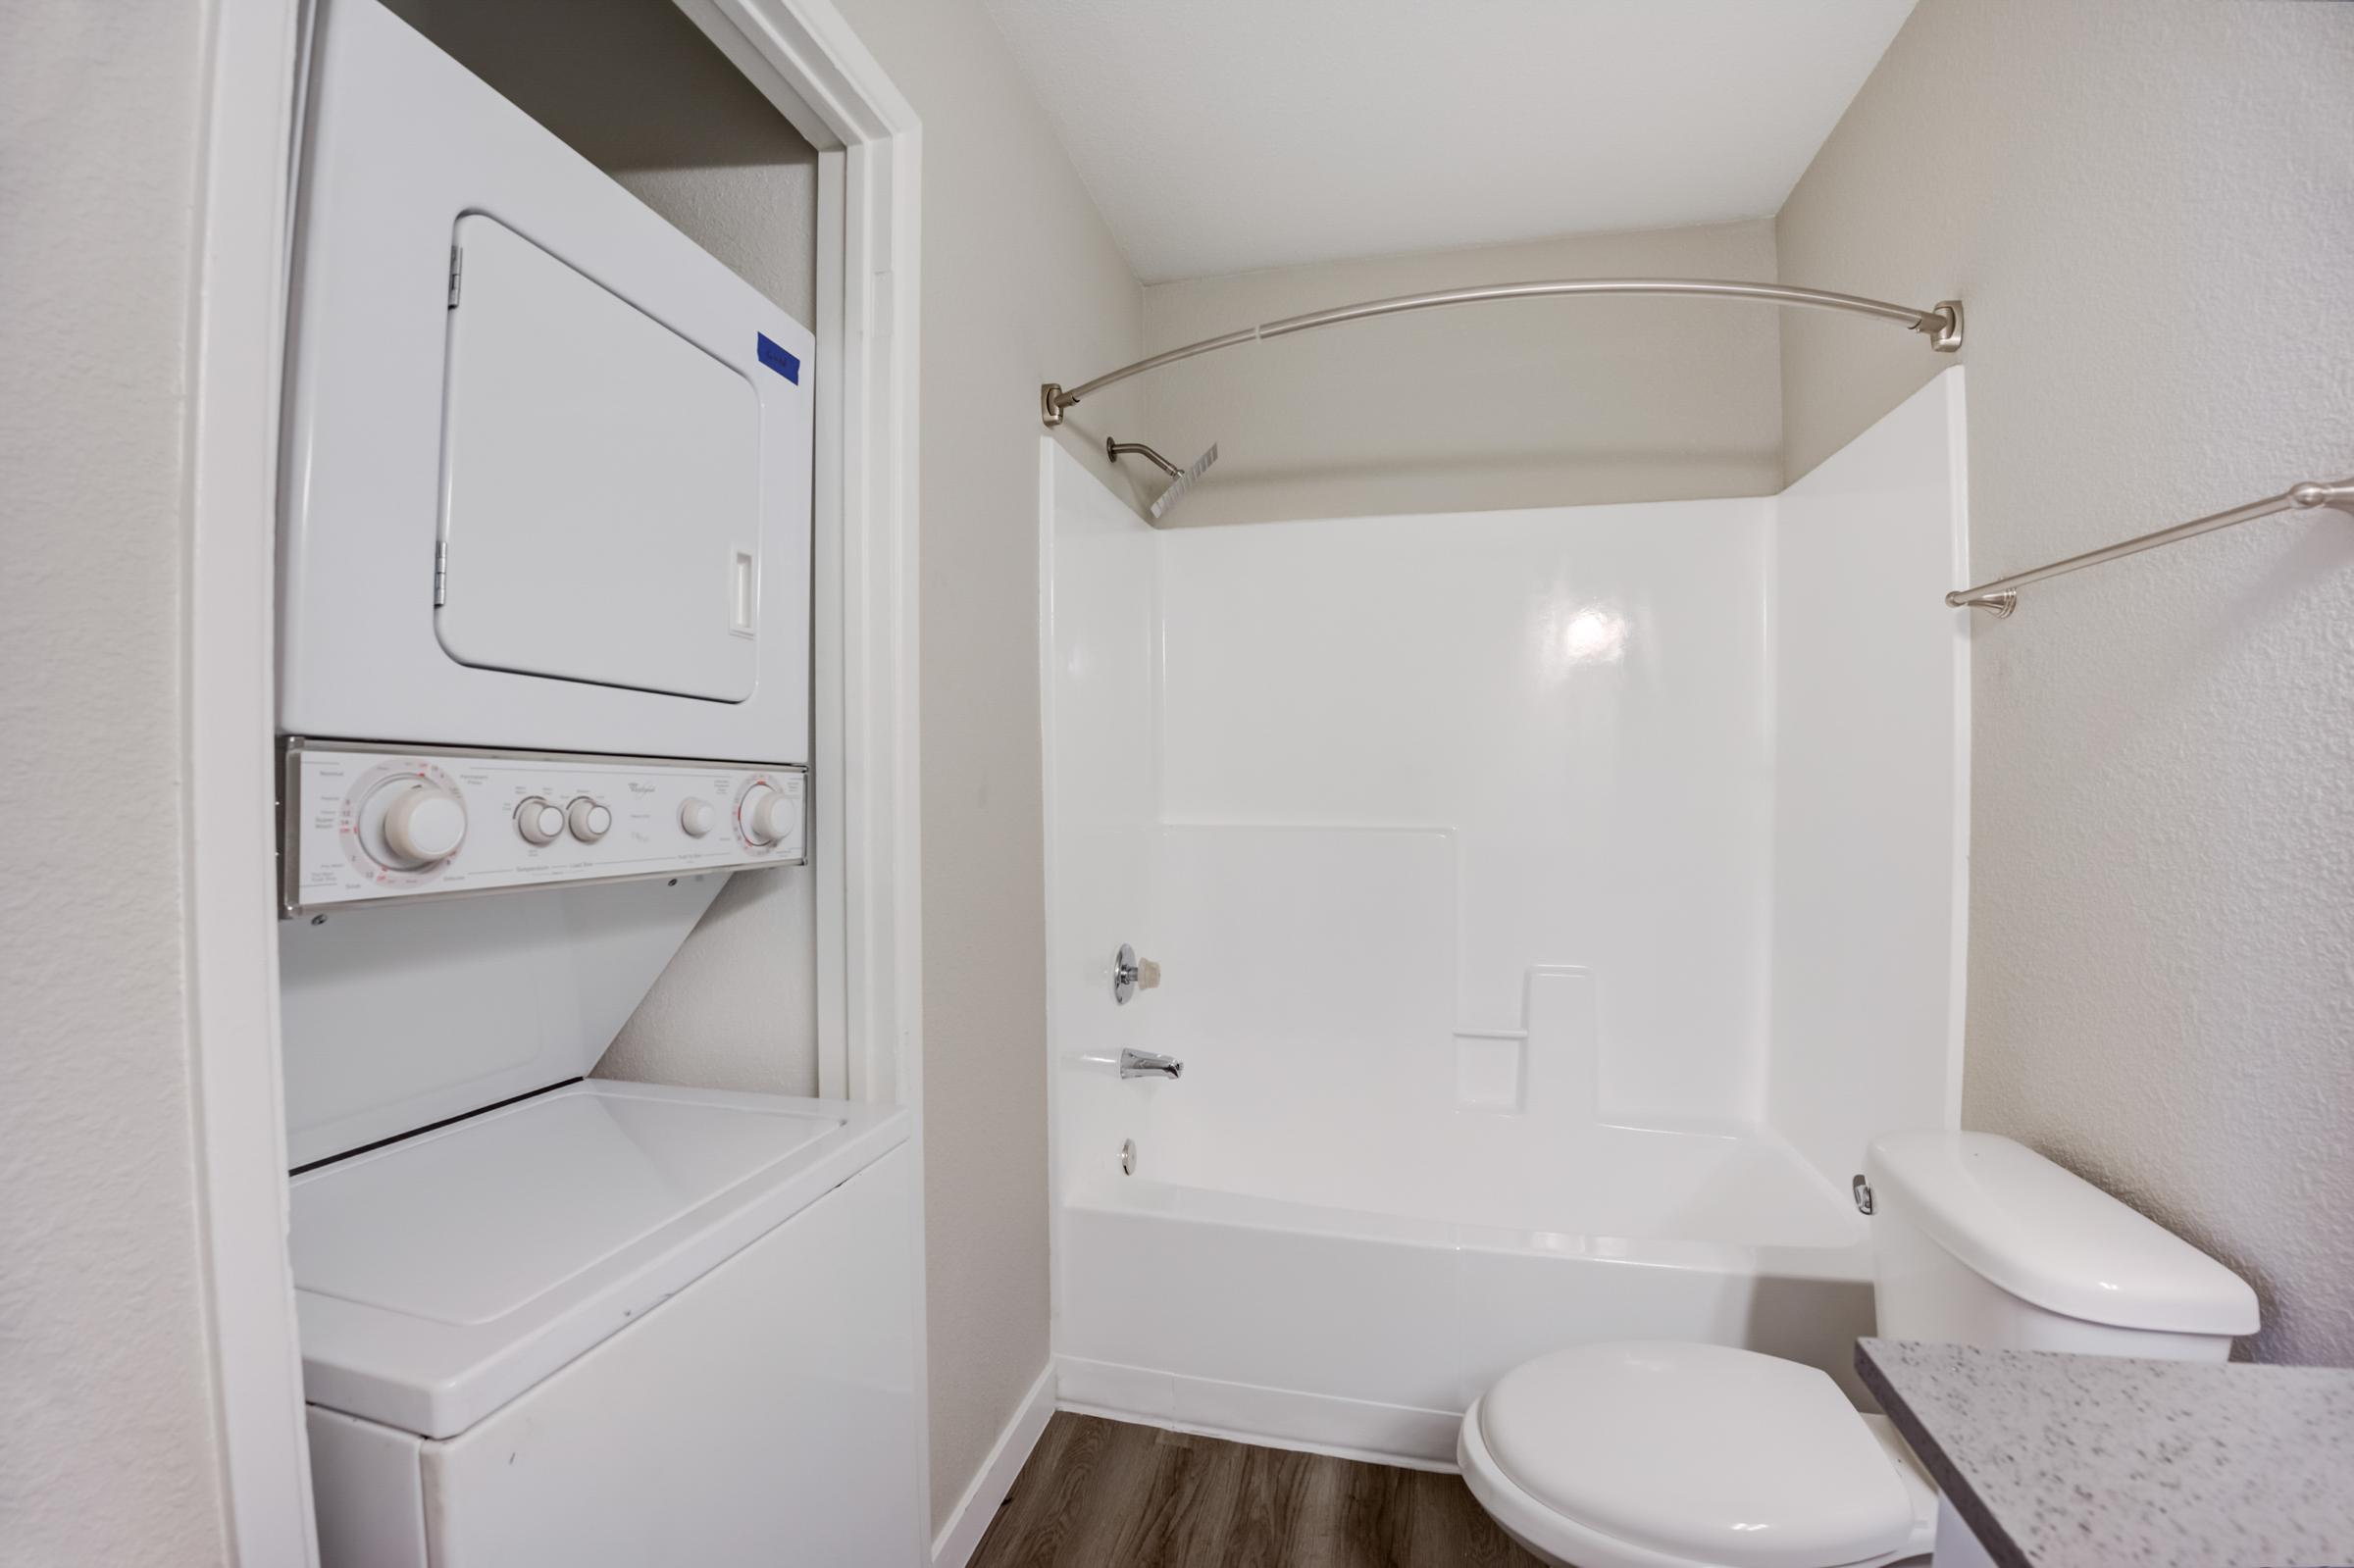 A bathroom with a tub and a washer and dryer at Rise at the Meadows.